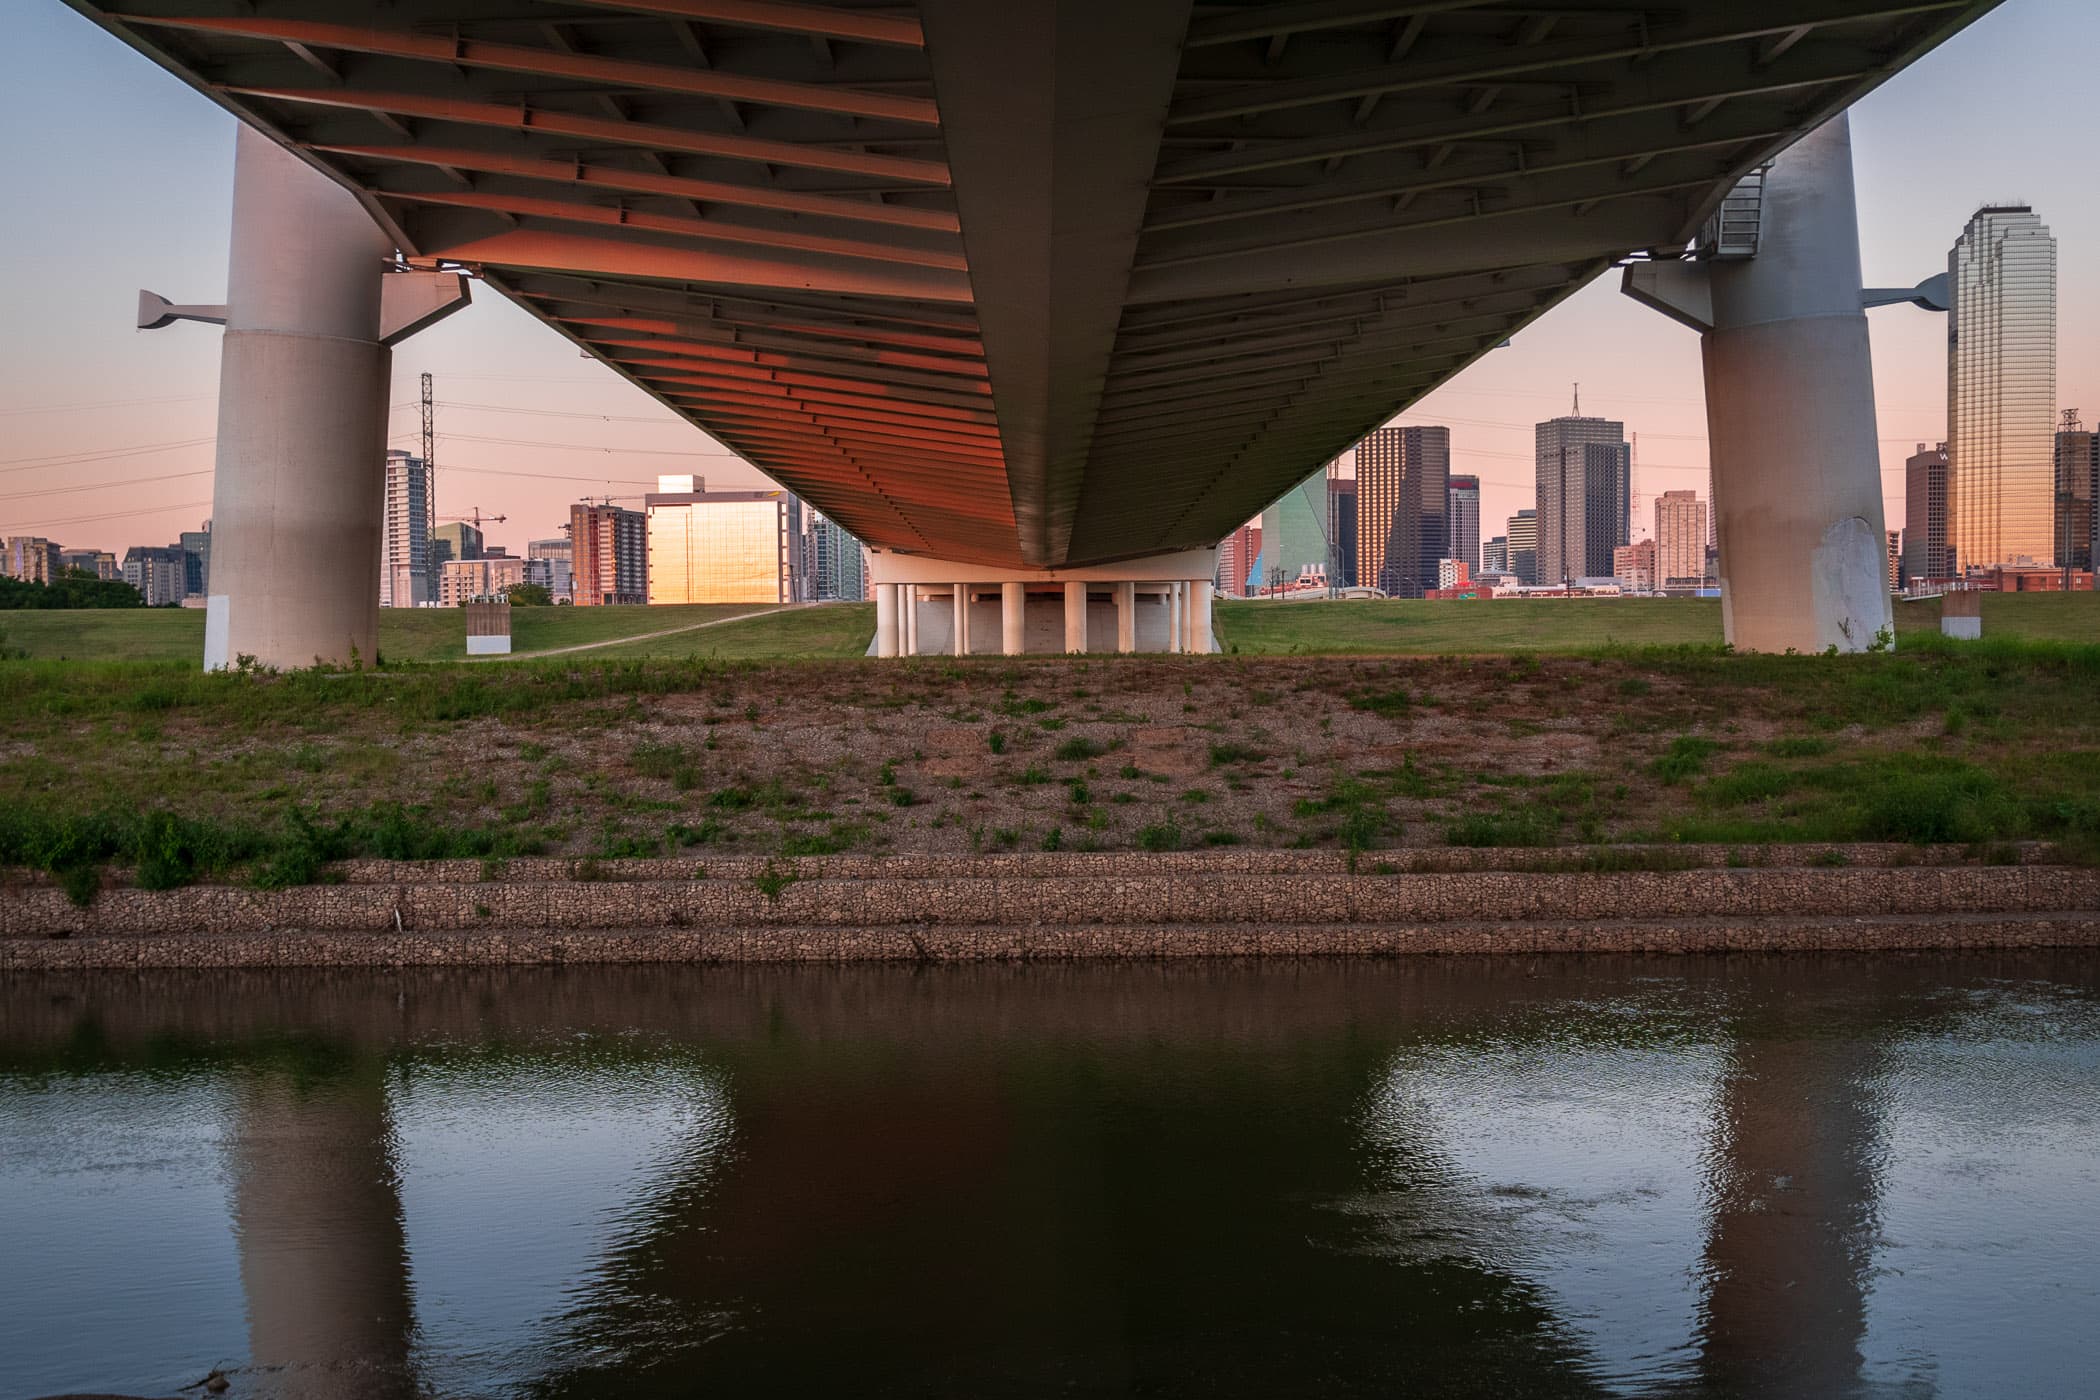 The Margaret Hunt Hill Bridge reaches over the Trinity River towards Downtown Dallas.